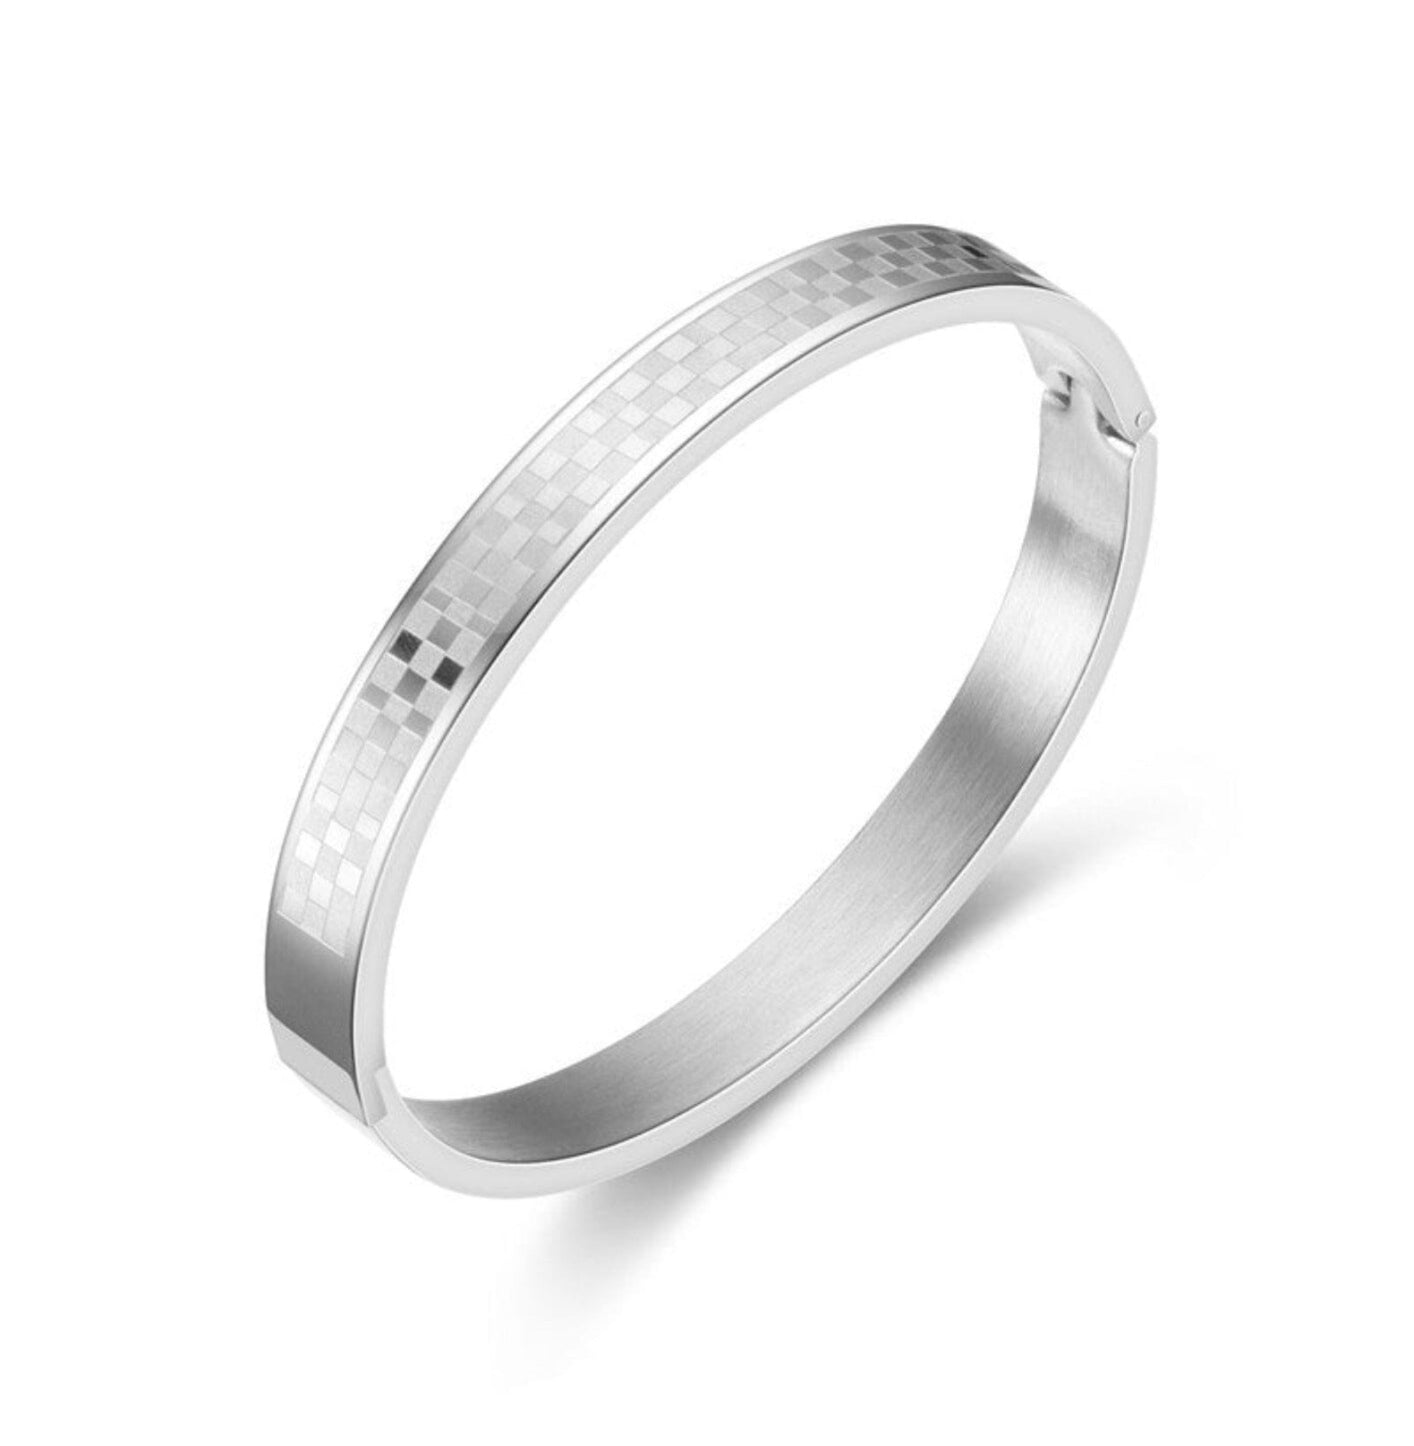 CHECKERED BANGLE - SILVER ring Yubama Jewelry Online Store - The Elegant Designs of Gold and Silver ! Silver 